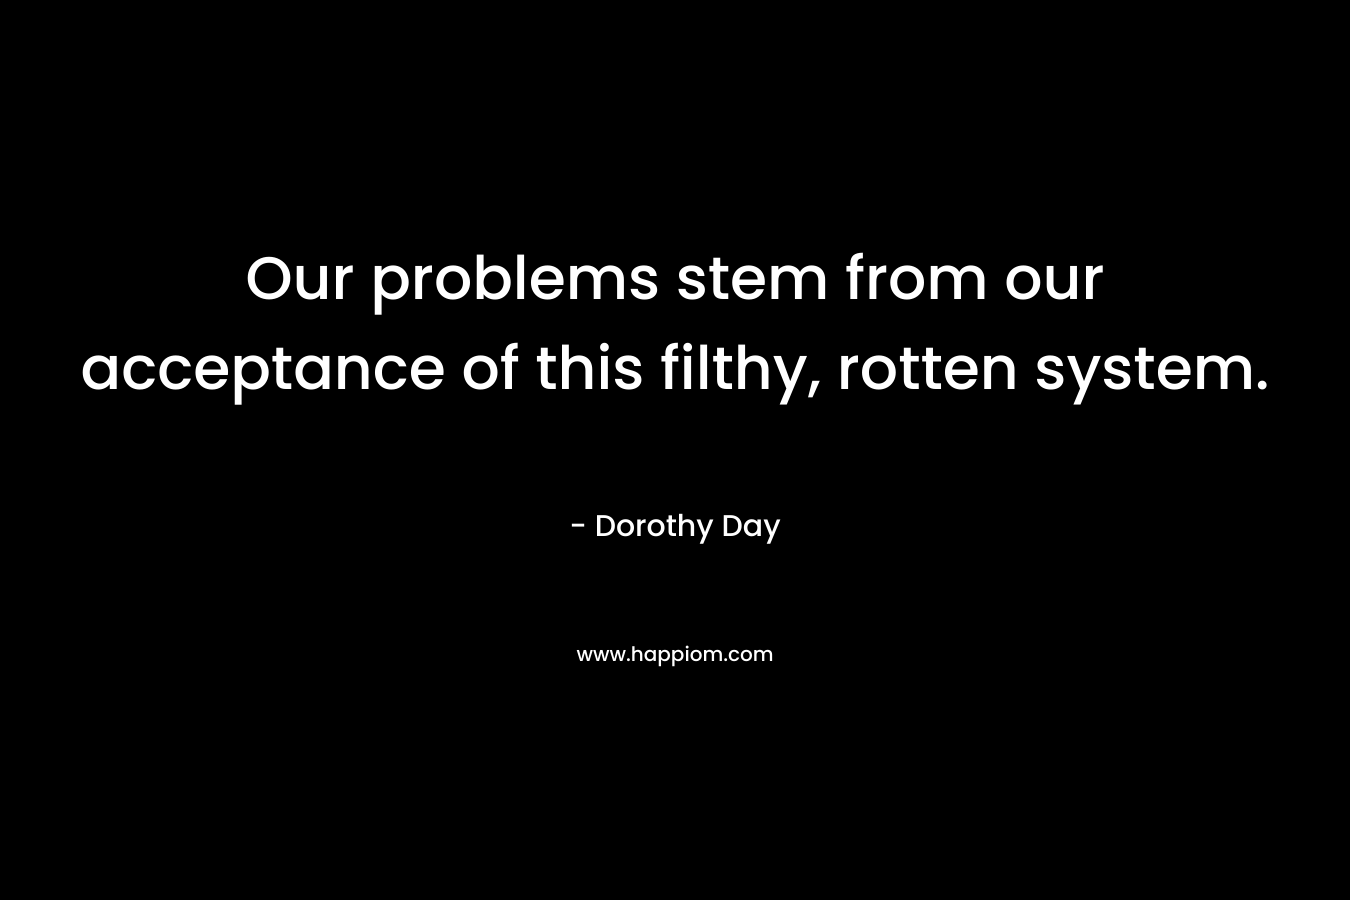 Our problems stem from our acceptance of this filthy, rotten system. – Dorothy Day